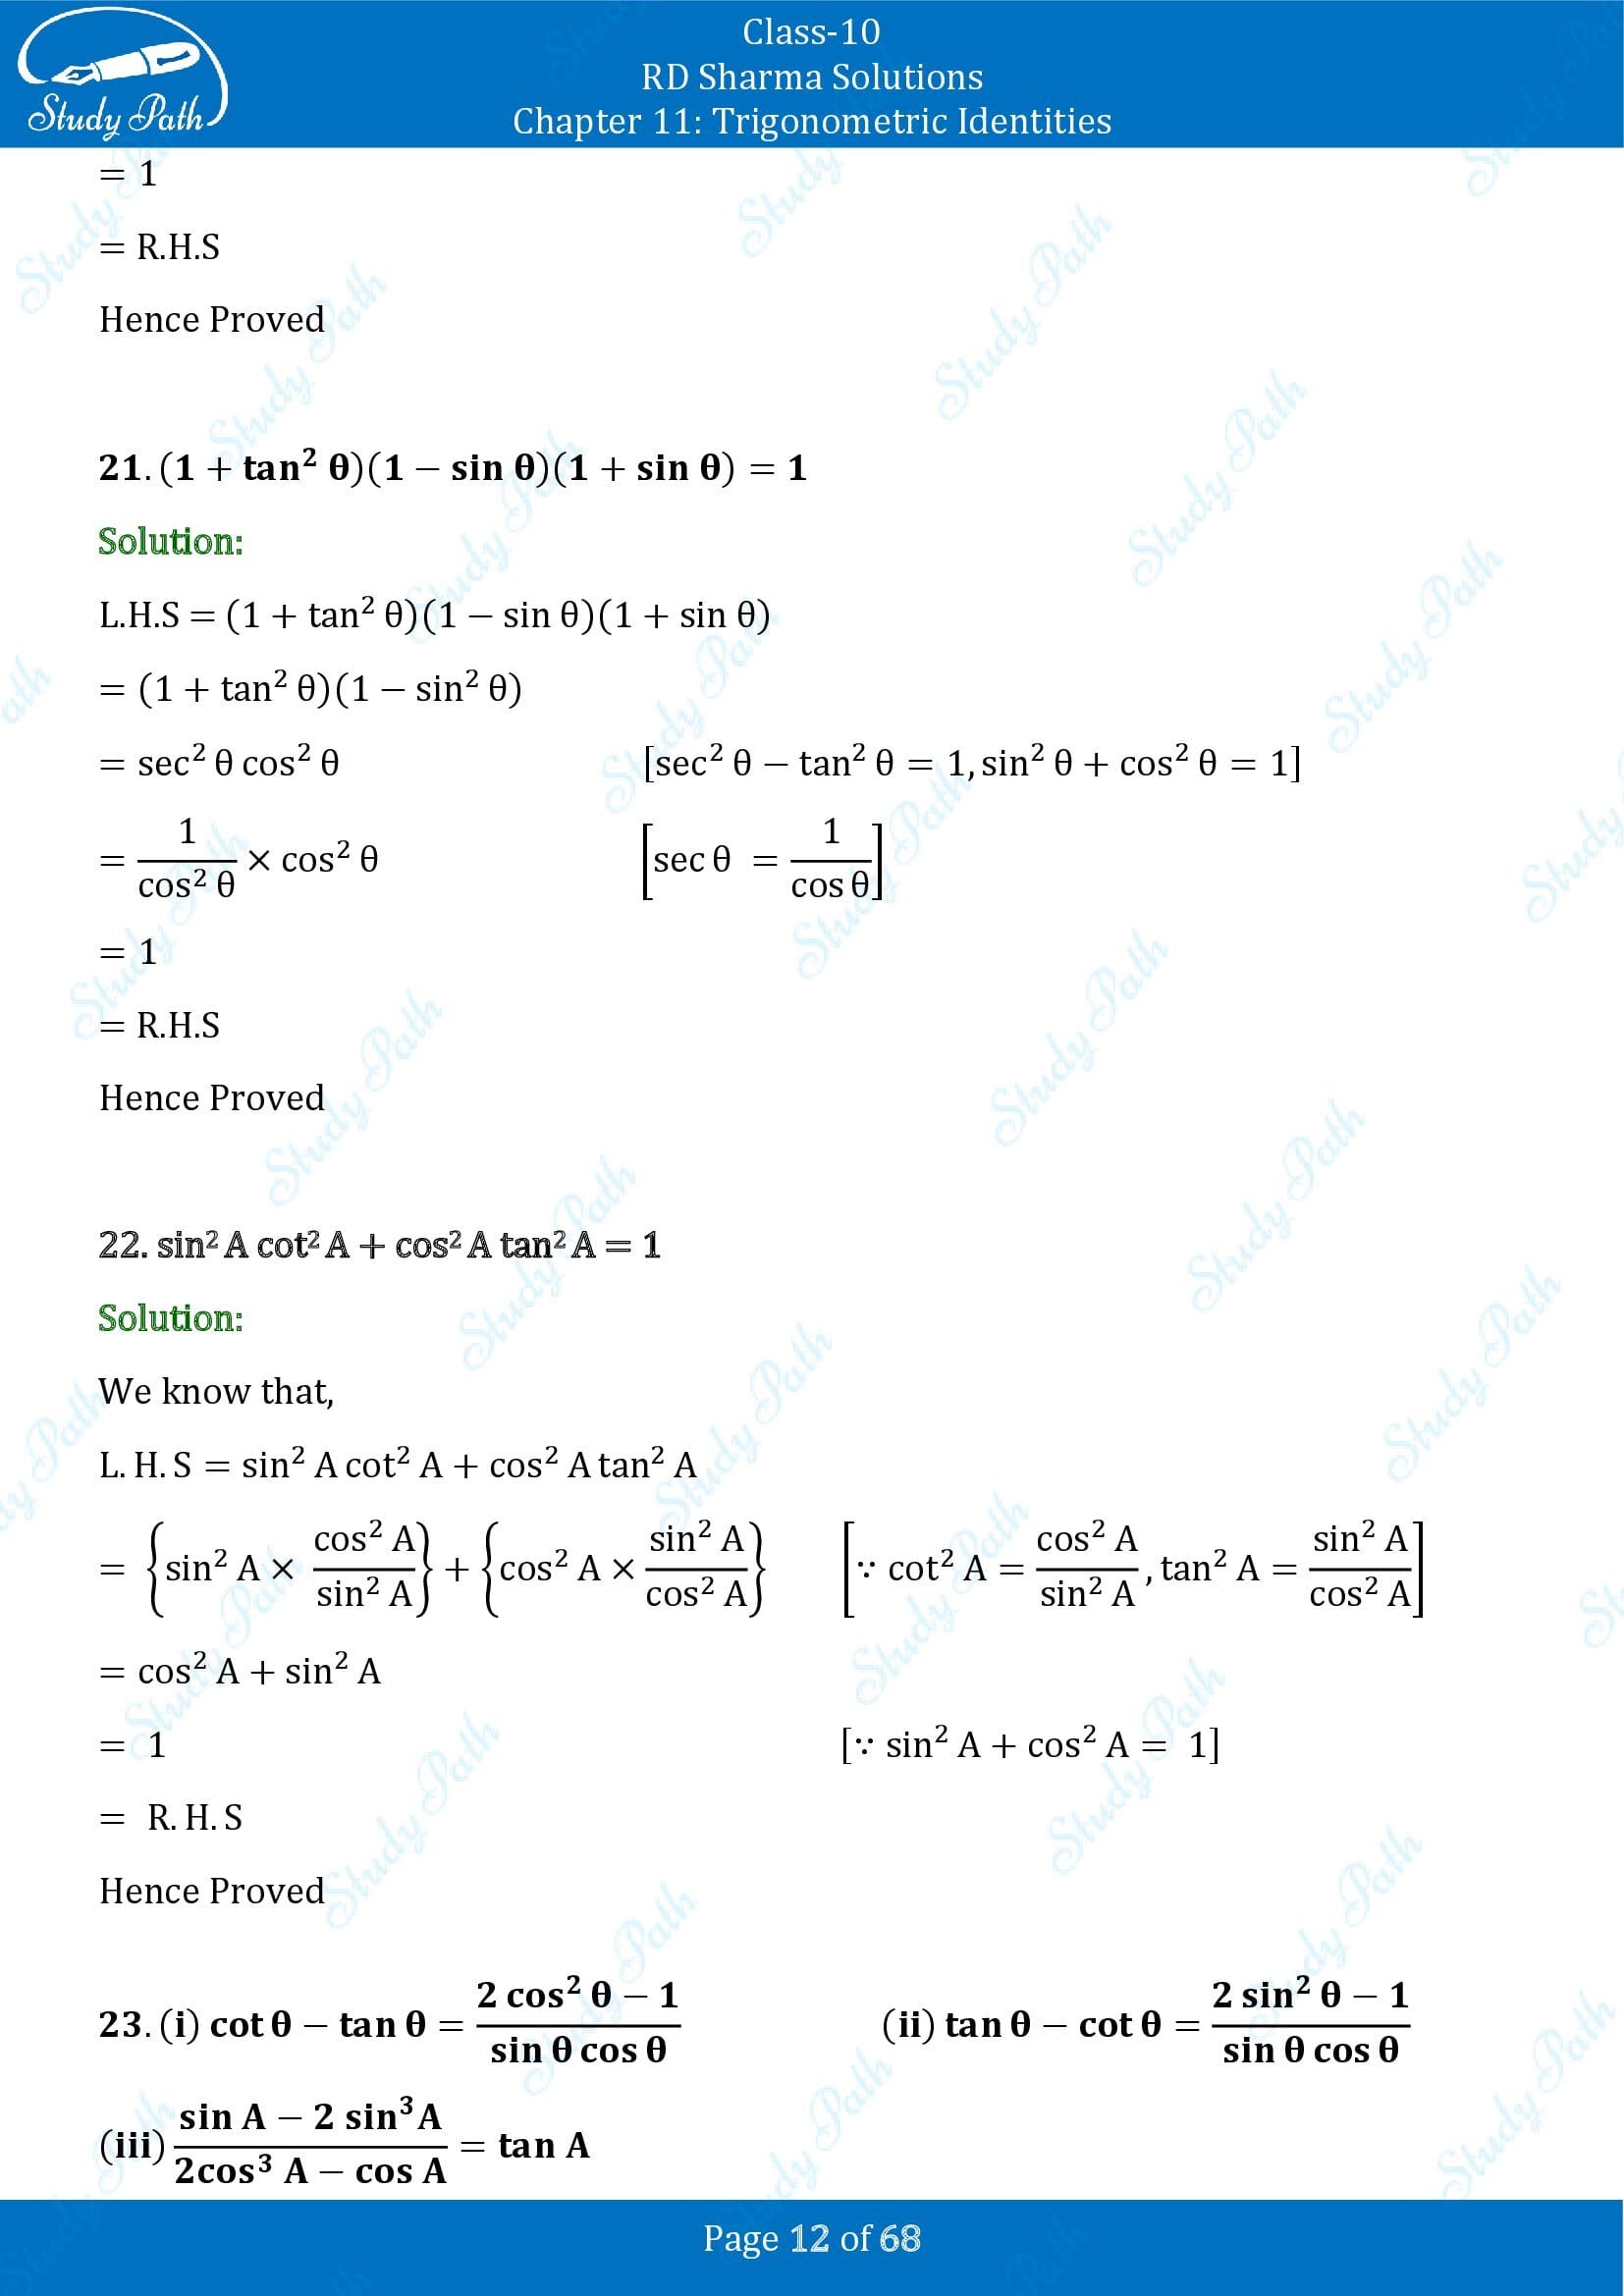 RD Sharma Solutions Class 10 Chapter 11 Trigonometric Identities Exercise 11.1 00012